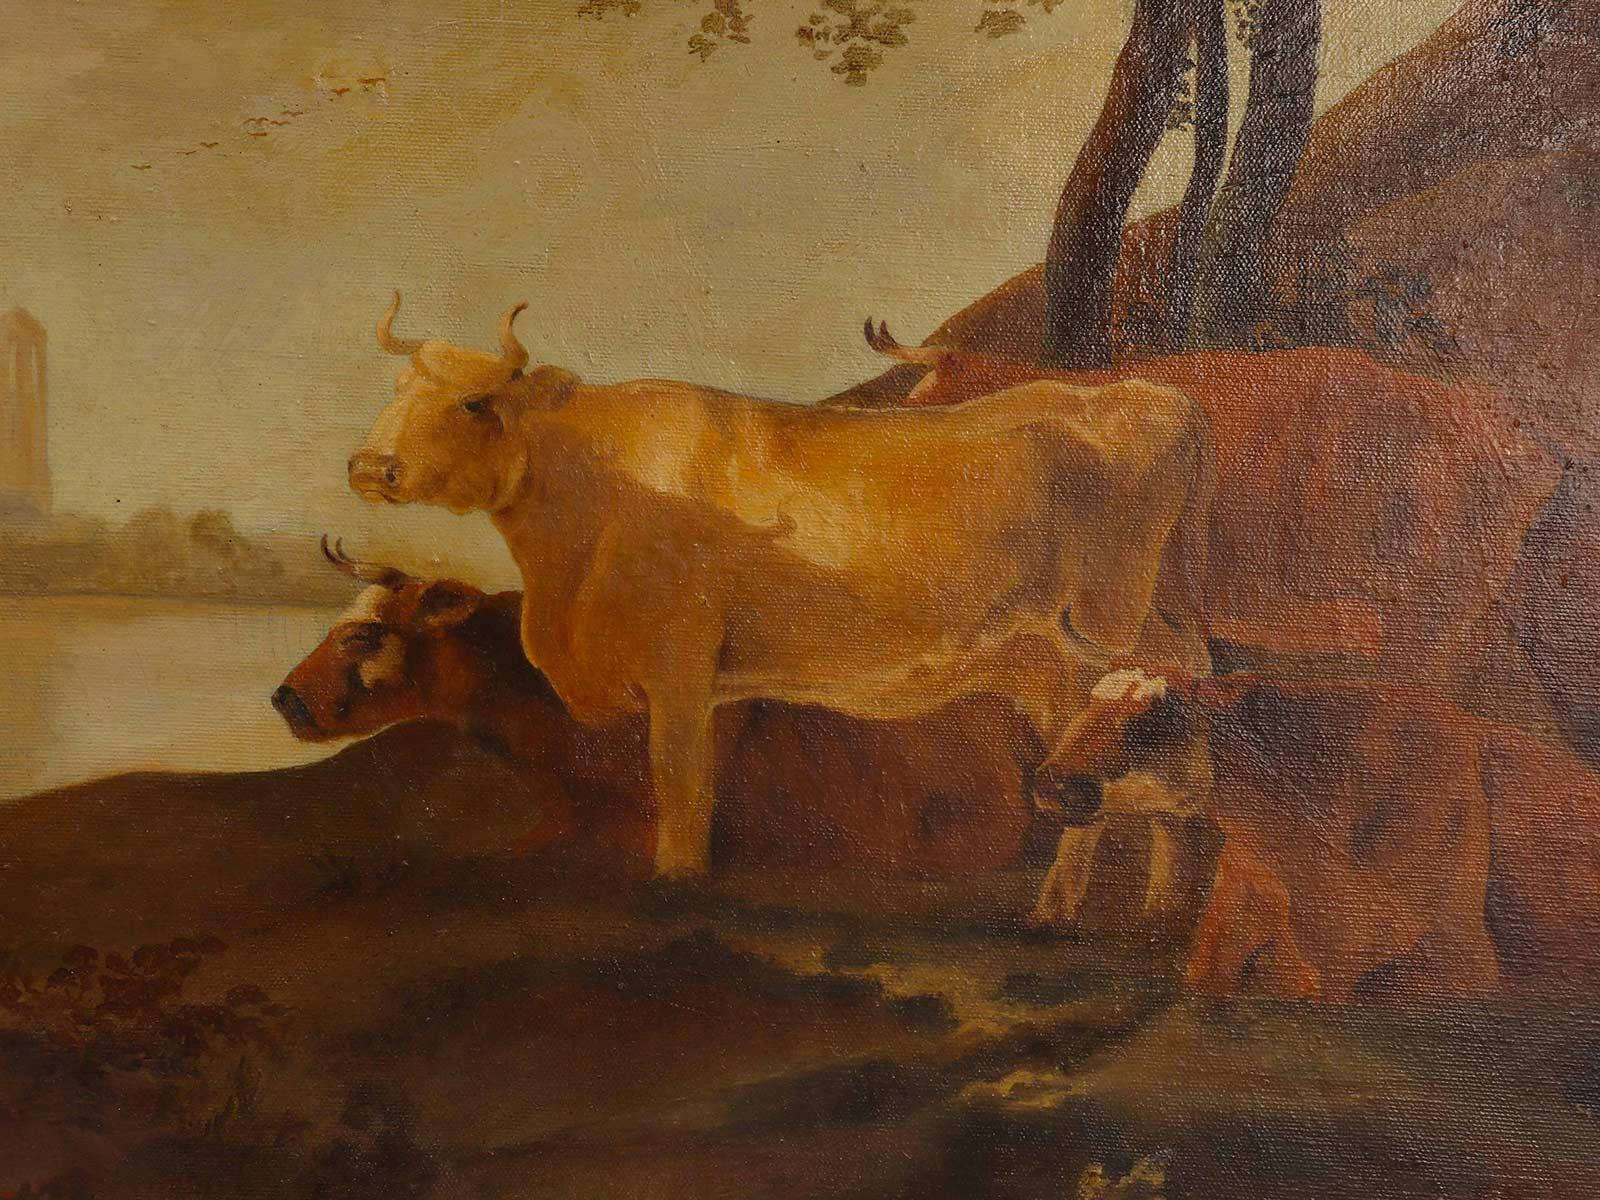 Austrian Painting Oil on Canvas with Cows, Austria, 1880